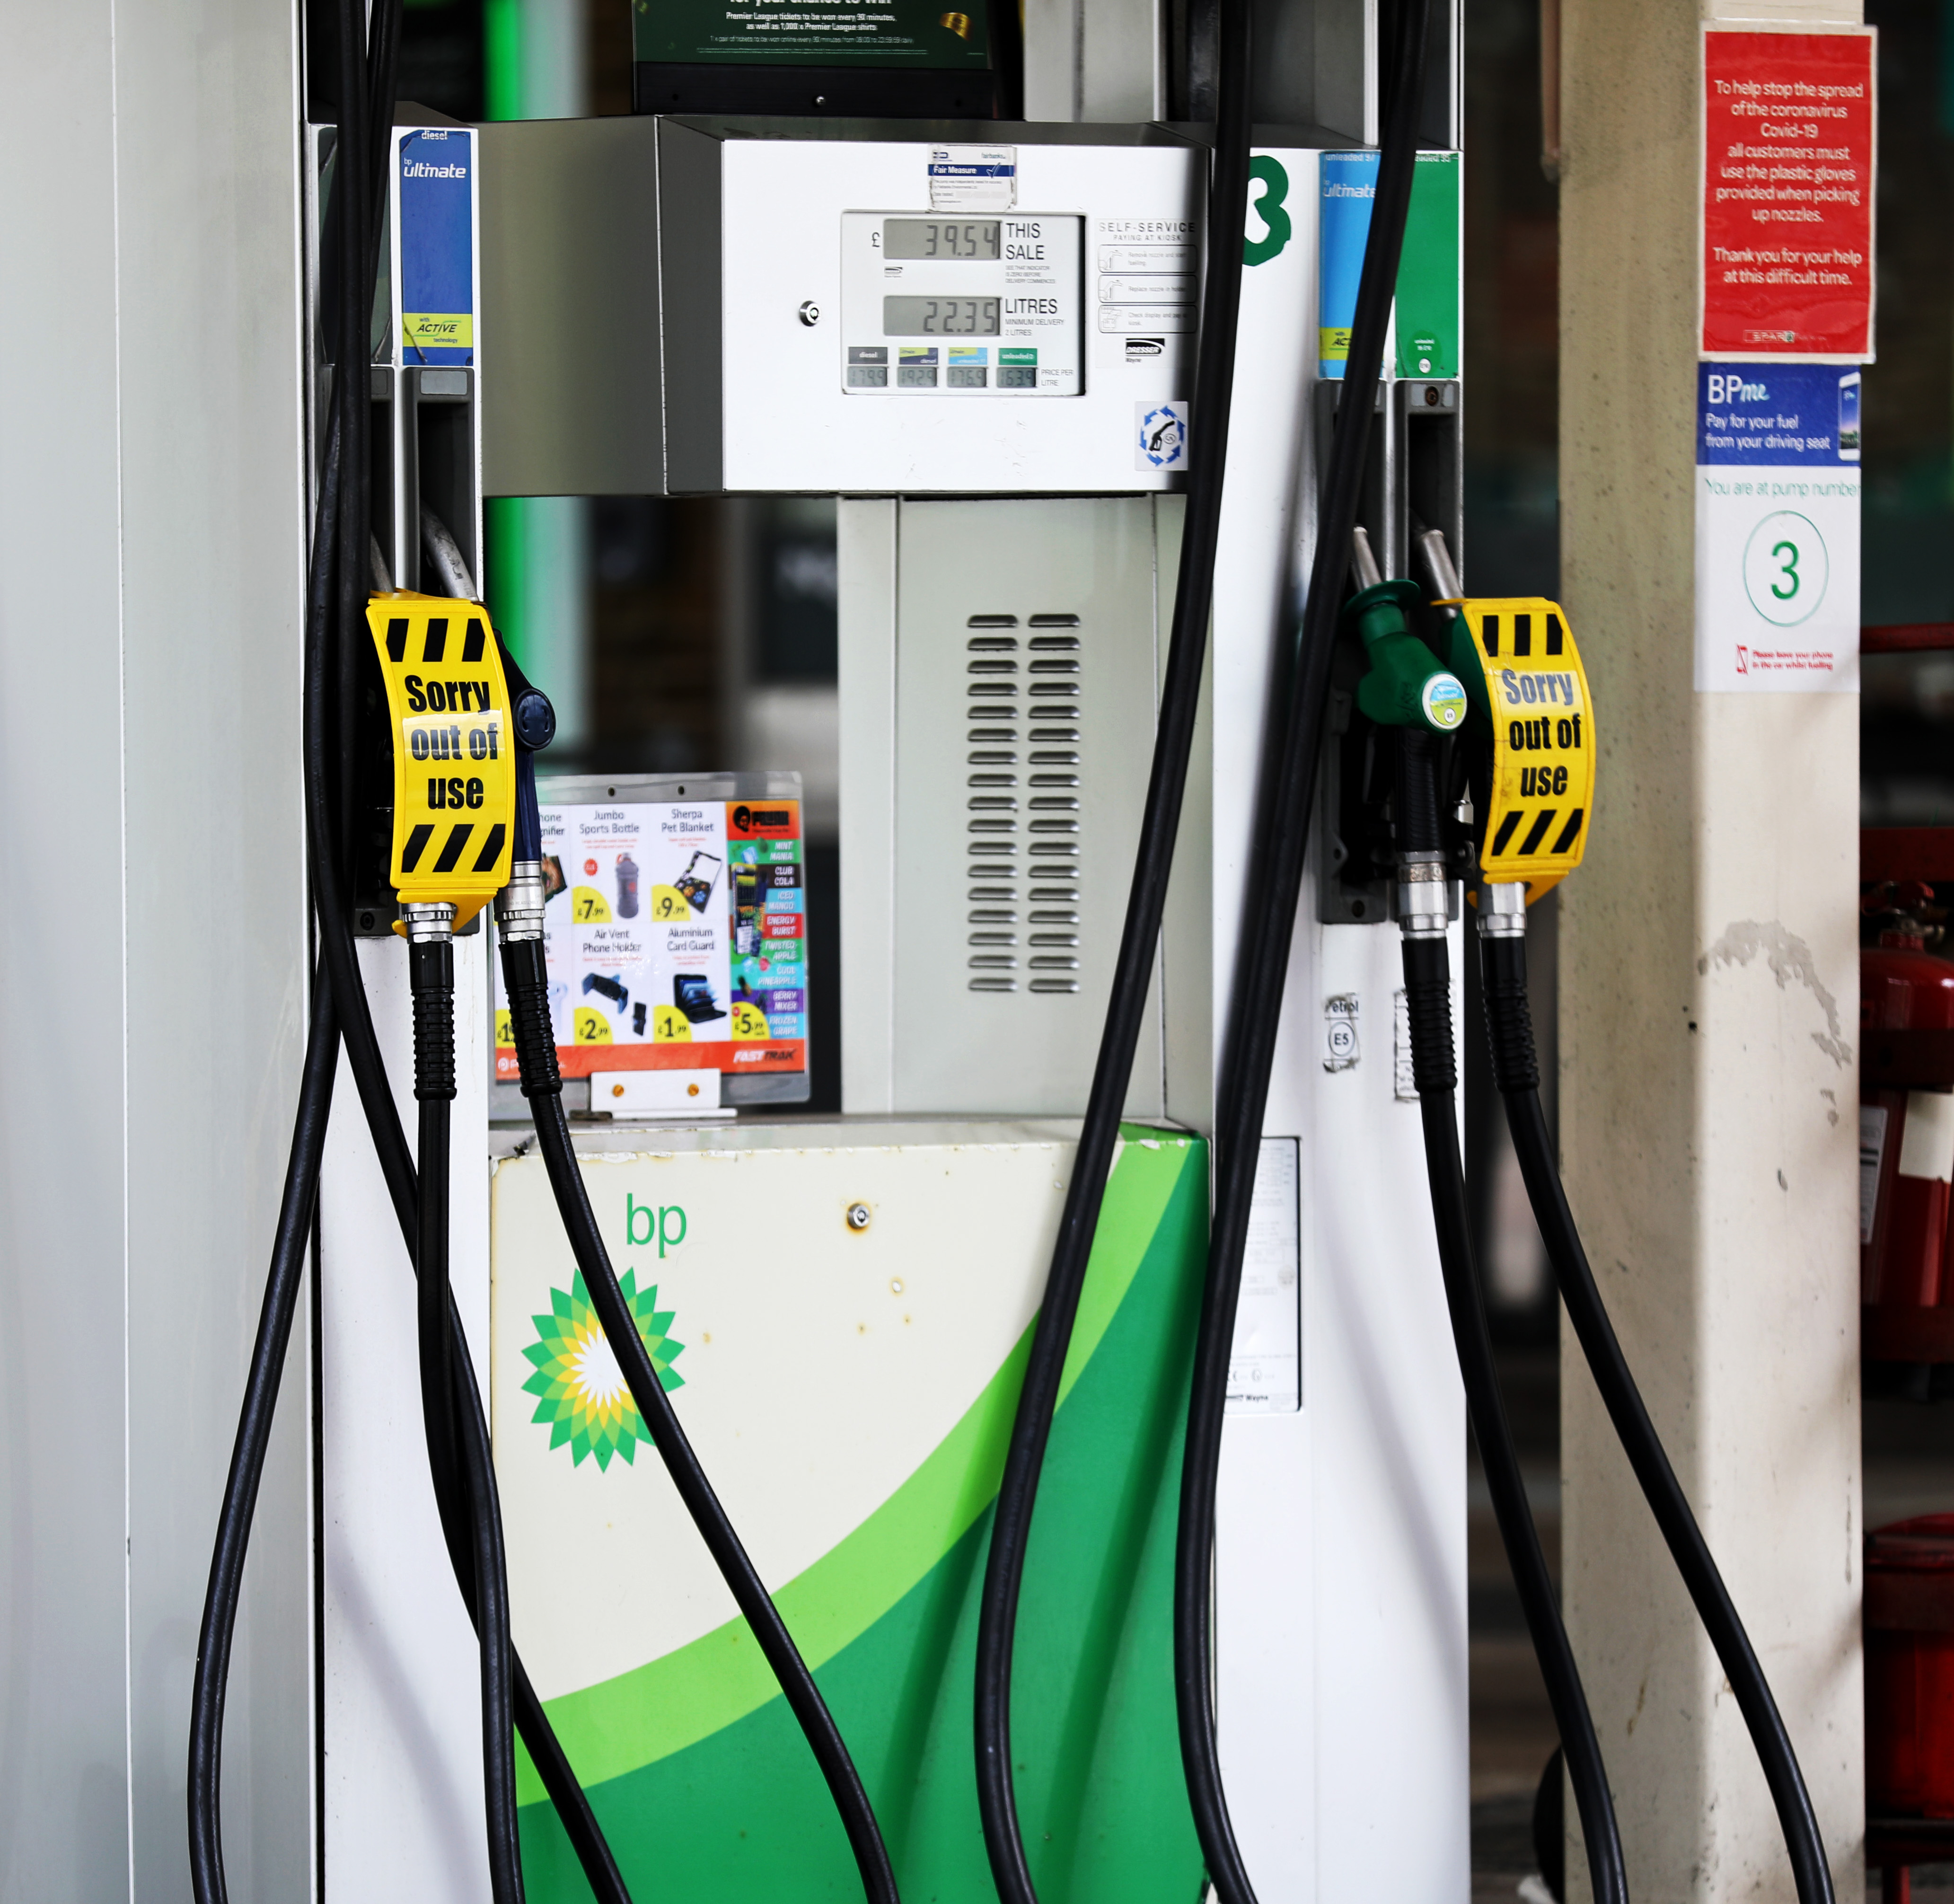 Closed pumps are seen in a petrol station in London, Britain, April 8, 2022.